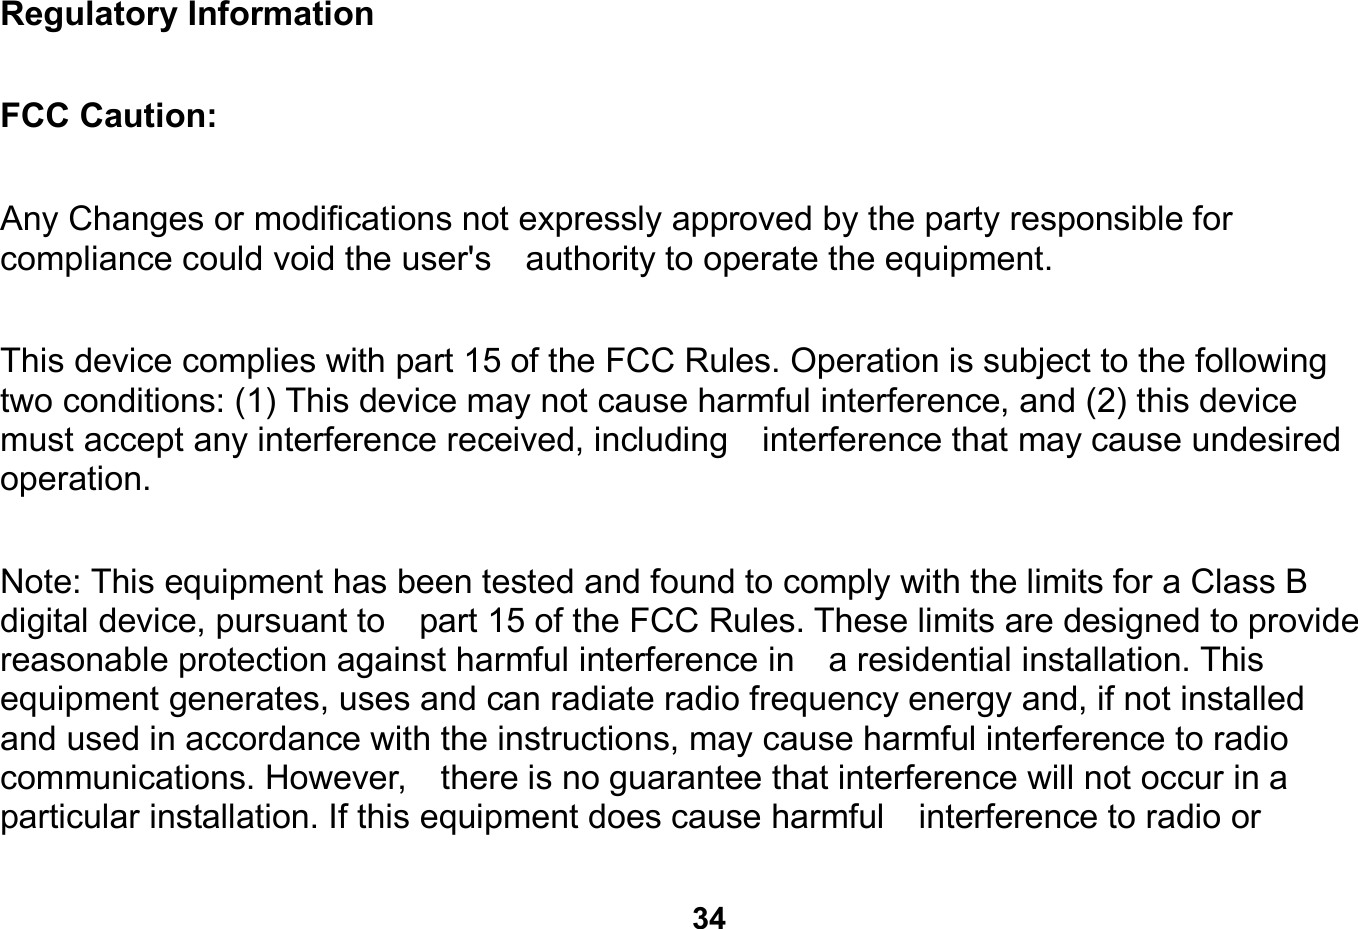   34  Regulatory Information                                                                        FCC Caution:  Any Changes or modifications not expressly approved by the party responsible for compliance could void the user&apos;s    authority to operate the equipment.        This device complies with part 15 of the FCC Rules. Operation is subject to the following two conditions: (1) This device may not cause harmful interference, and (2) this device must accept any interference received, including    interference that may cause undesired operation.     Note: This equipment has been tested and found to comply with the limits for a Class B digital device, pursuant to    part 15 of the FCC Rules. These limits are designed to provide reasonable protection against harmful interference in    a residential installation. This equipment generates, uses and can radiate radio frequency energy and, if not installed   and used in accordance with the instructions, may cause harmful interference to radio communications. However,    there is no guarantee that interference will not occur in a particular installation. If this equipment does cause harmful    interference to radio or 